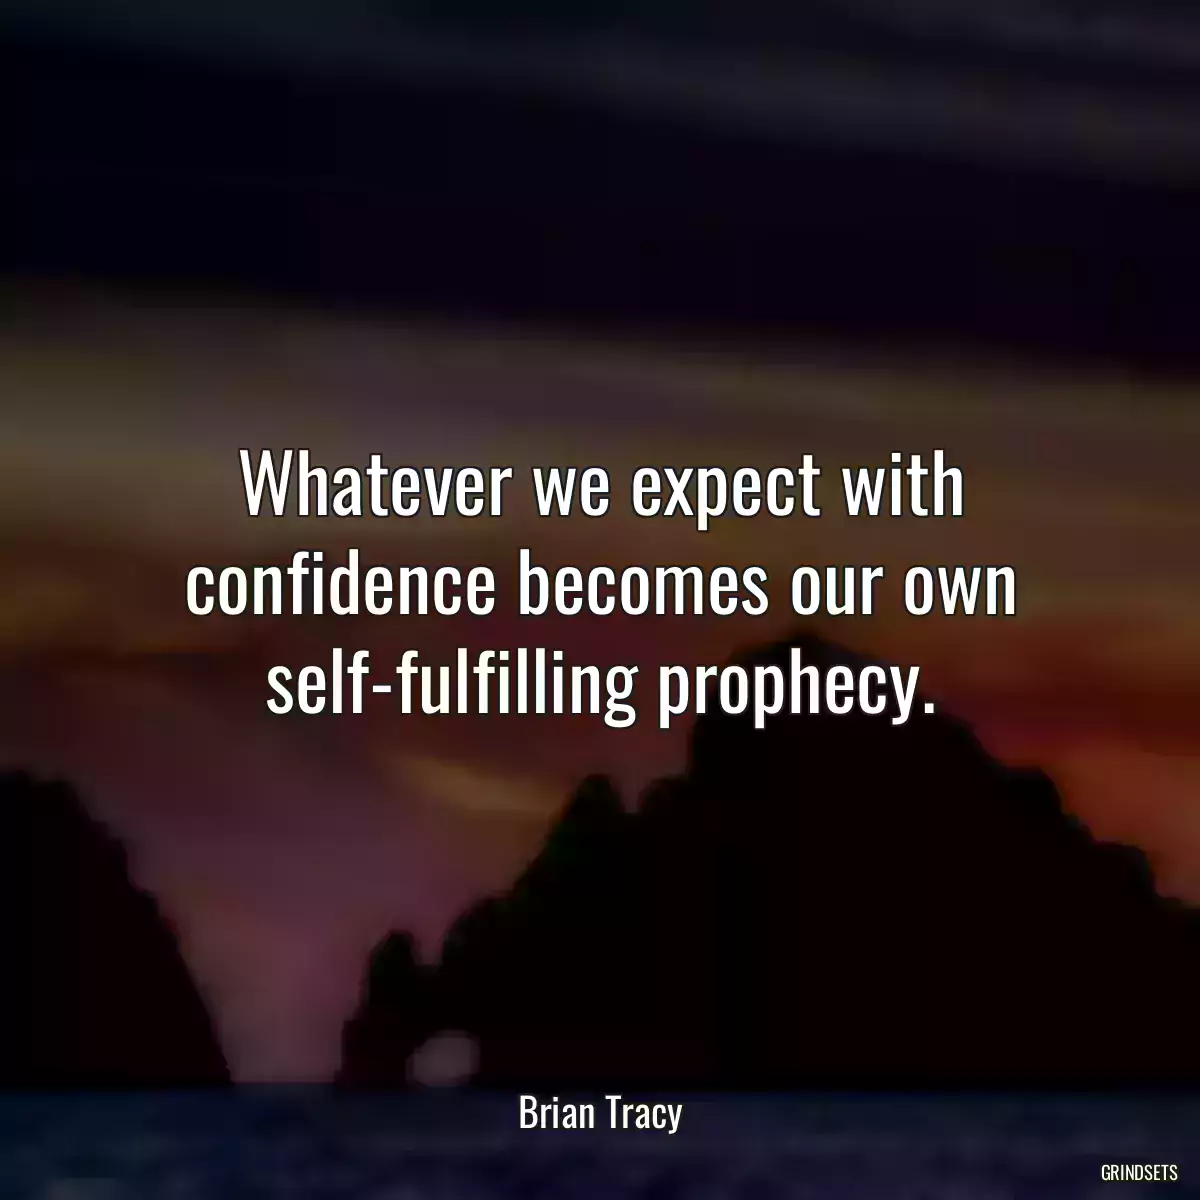 Whatever we expect with confidence becomes our own self-fulfilling prophecy.